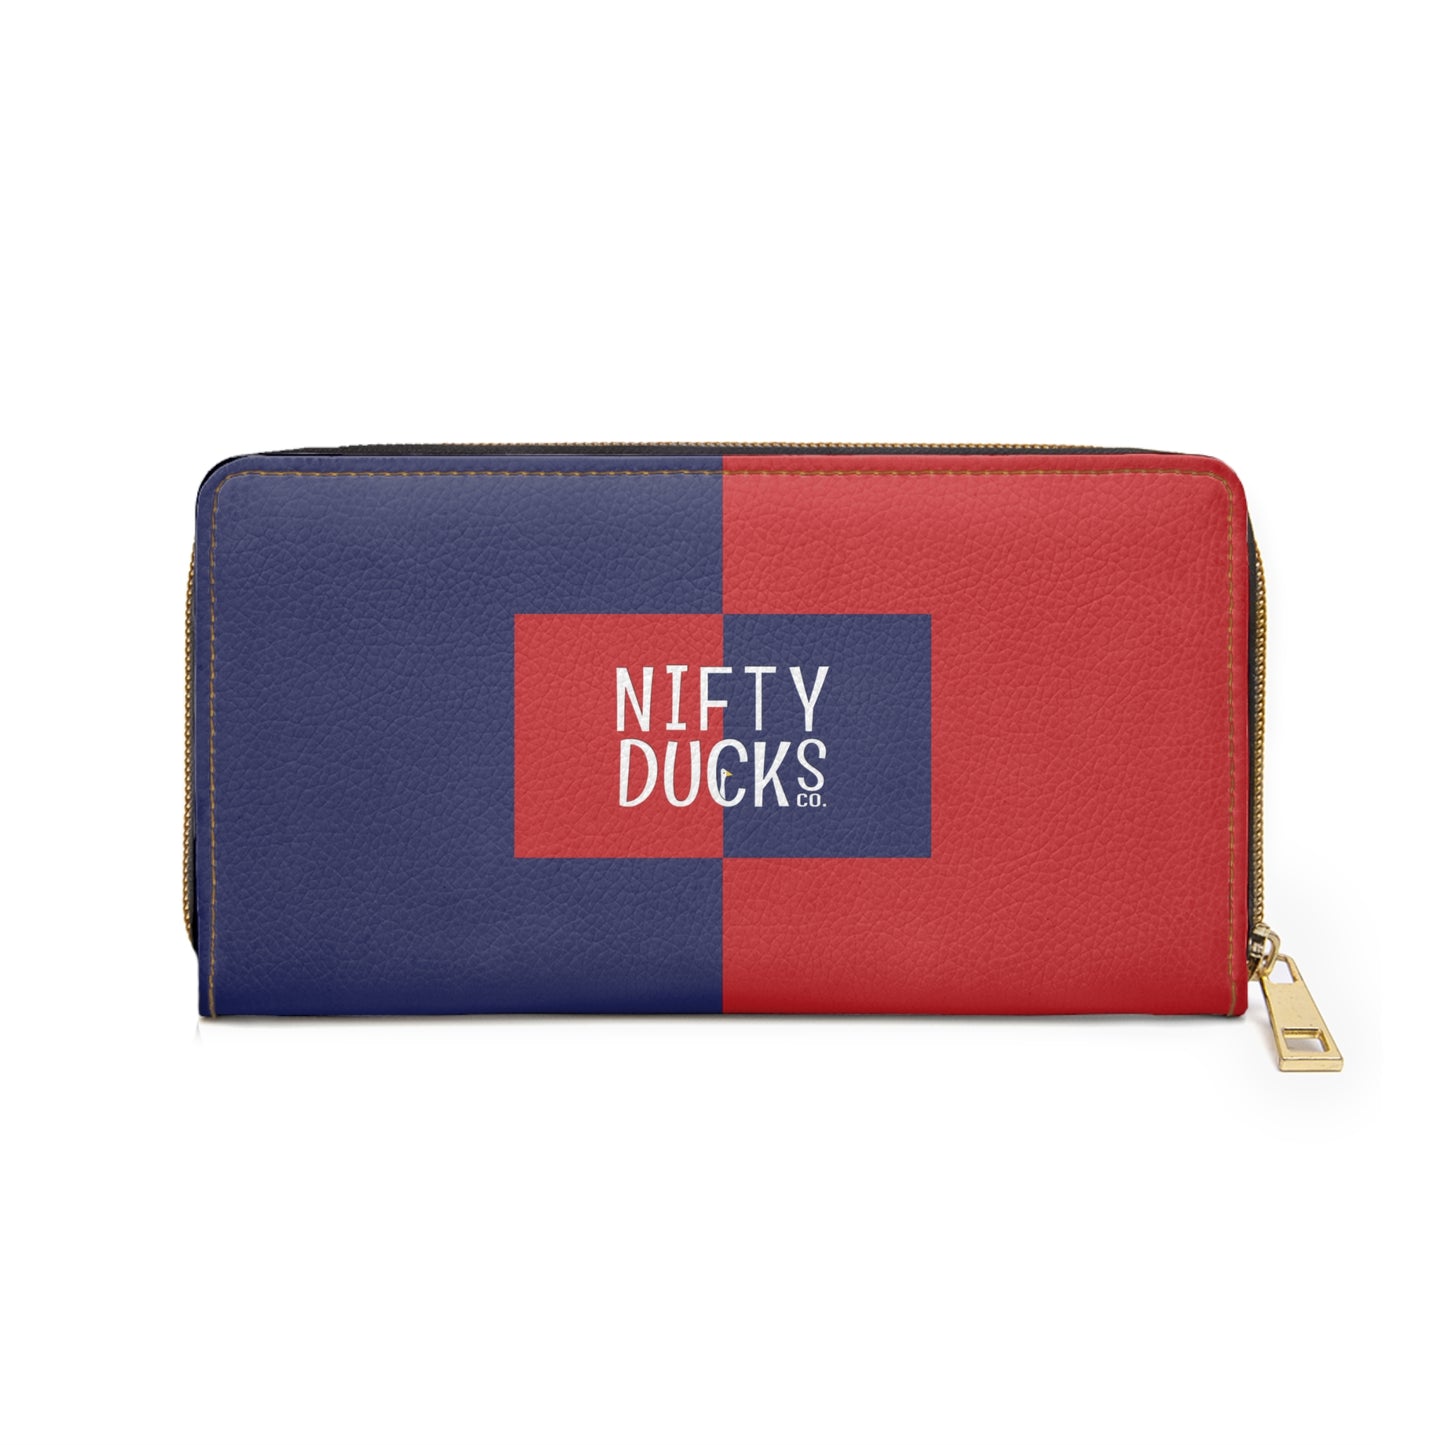 Chicago - Red White and Blue City series - Zipper Wallet